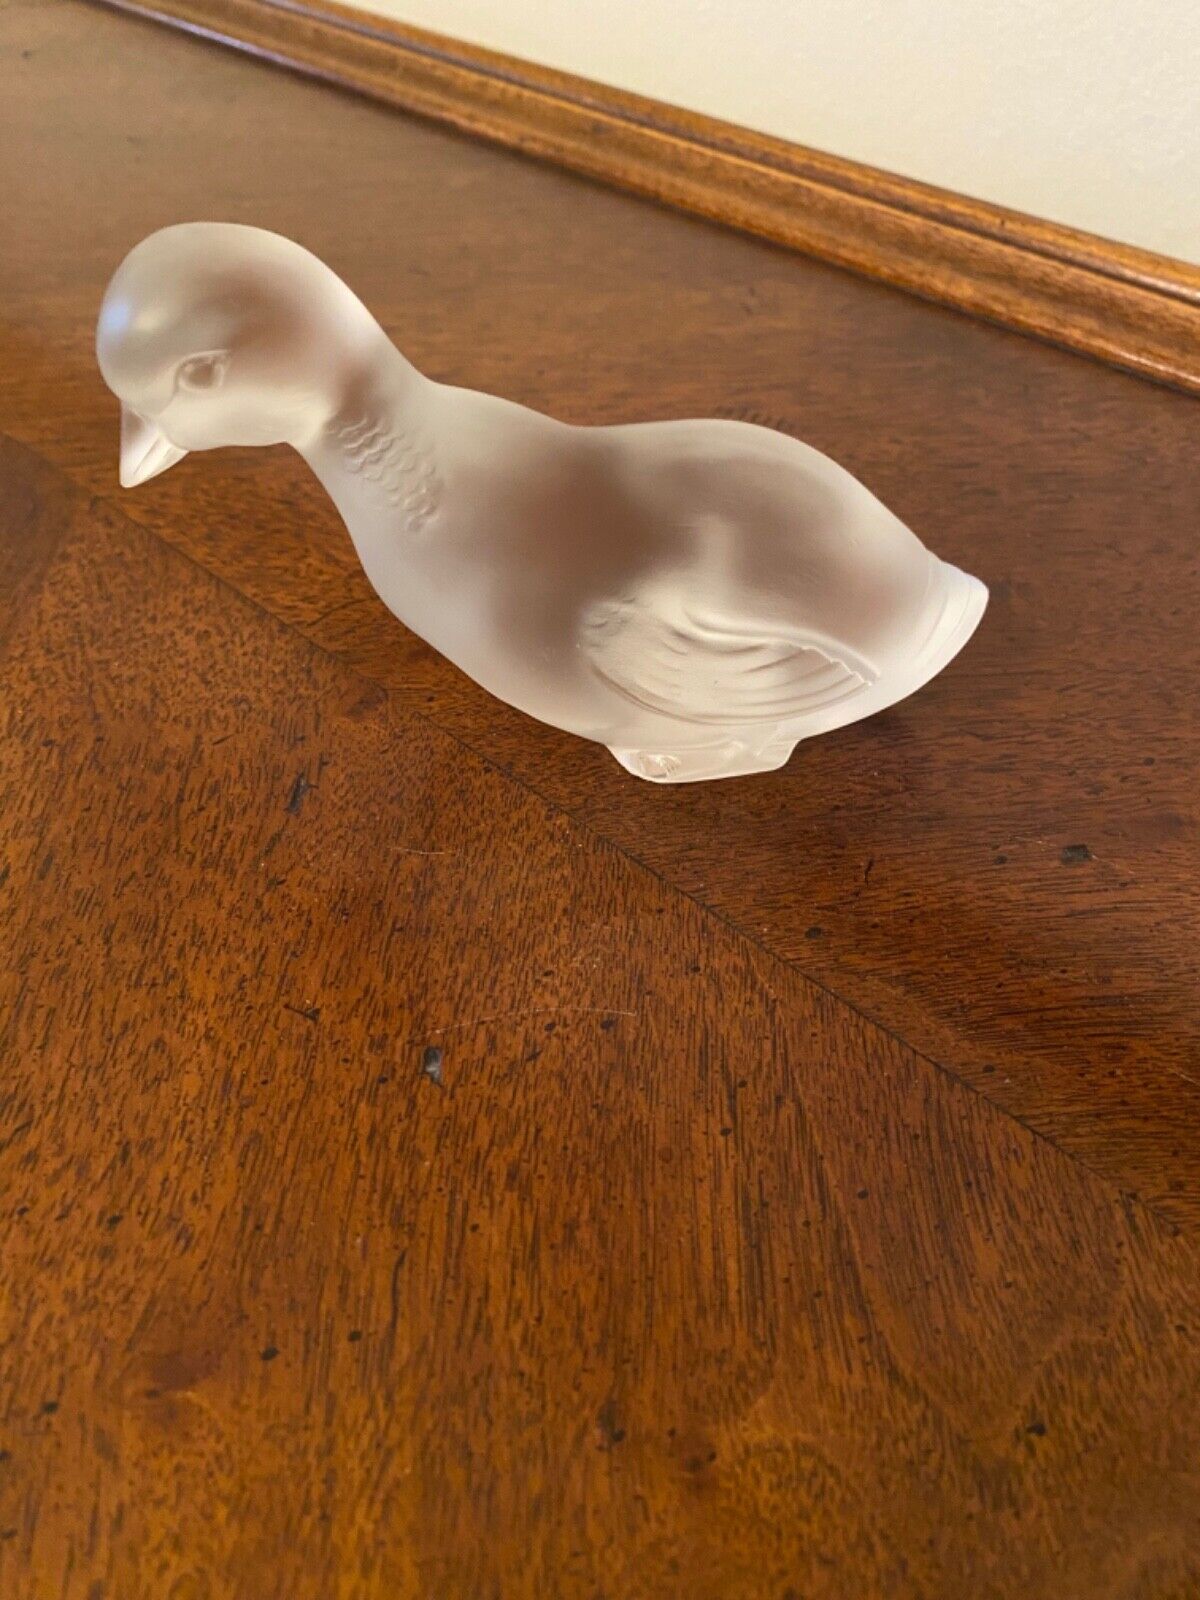 VTG FRENCH BACCARAT FROSTED CRYSTAL DUCK FIGURINE PAPERWEIGHT